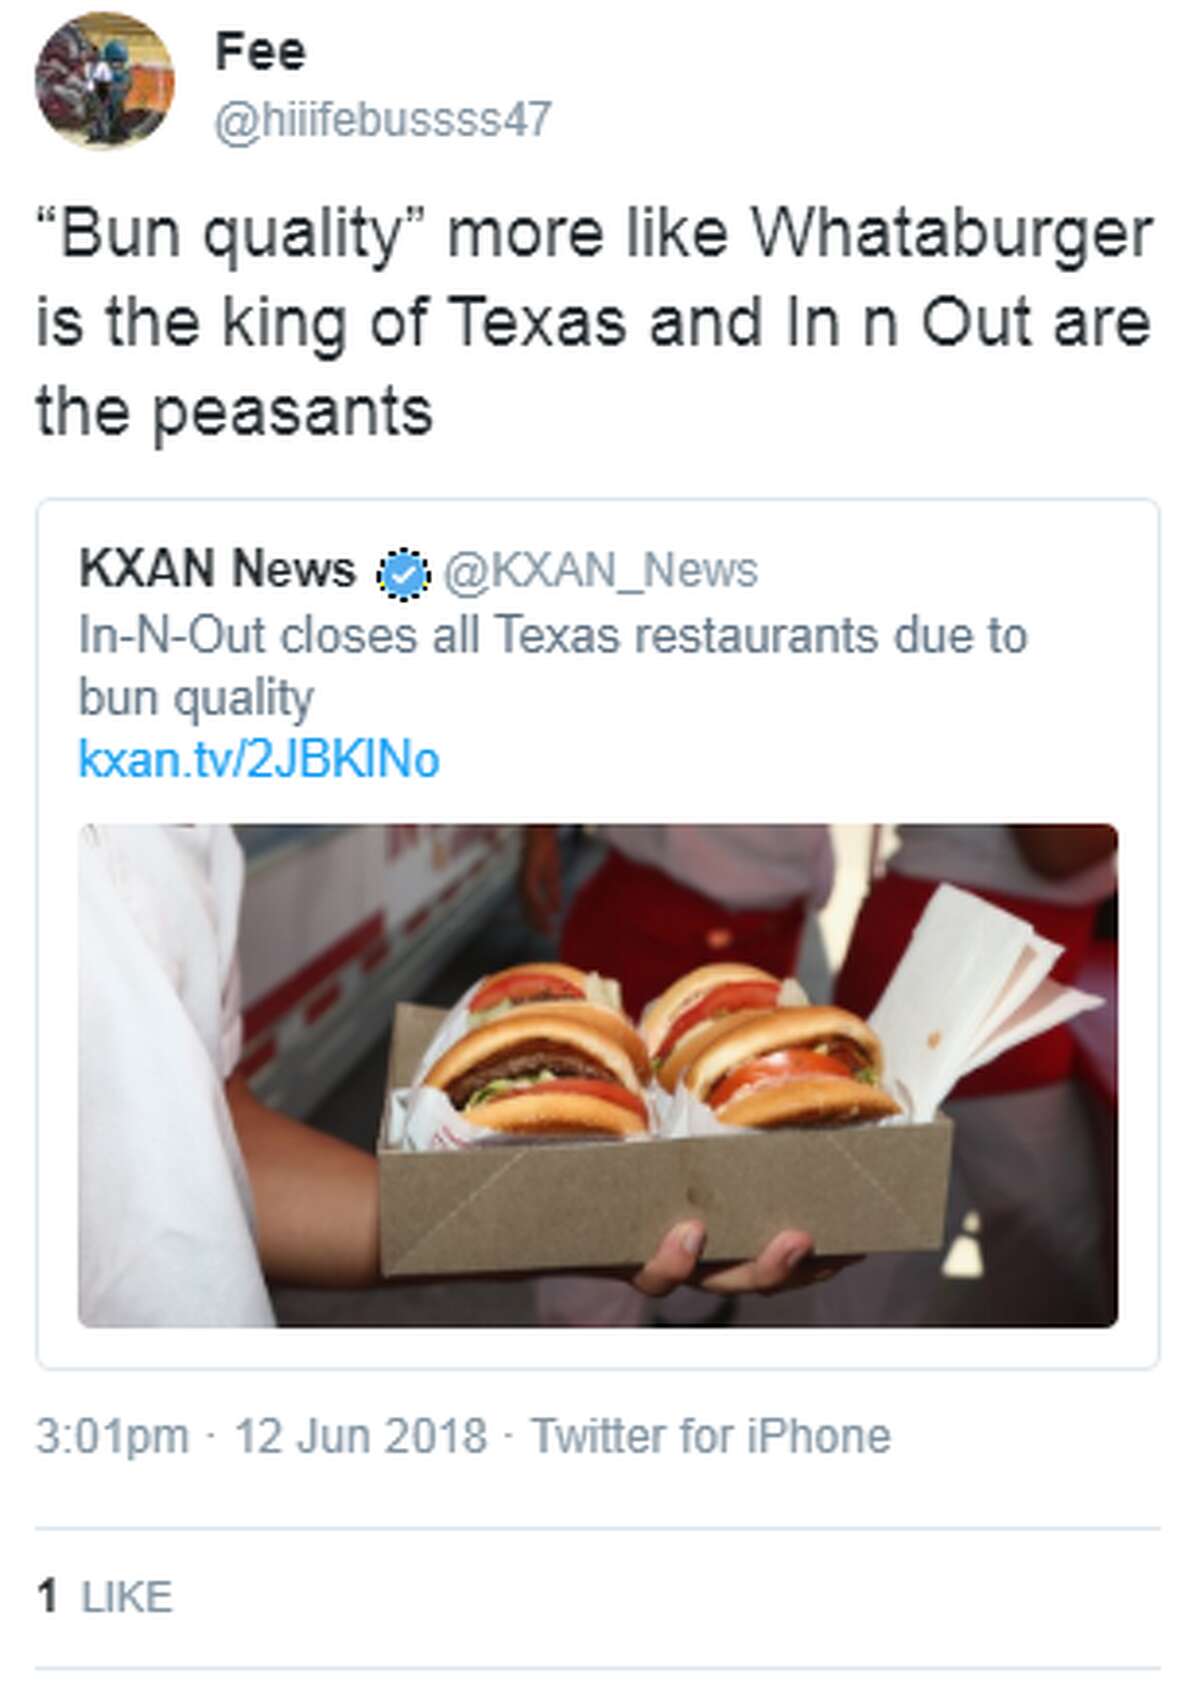 Whataburger fans and supporters took to the Internet after In-N-out announced closures in Texas due to bun quality.